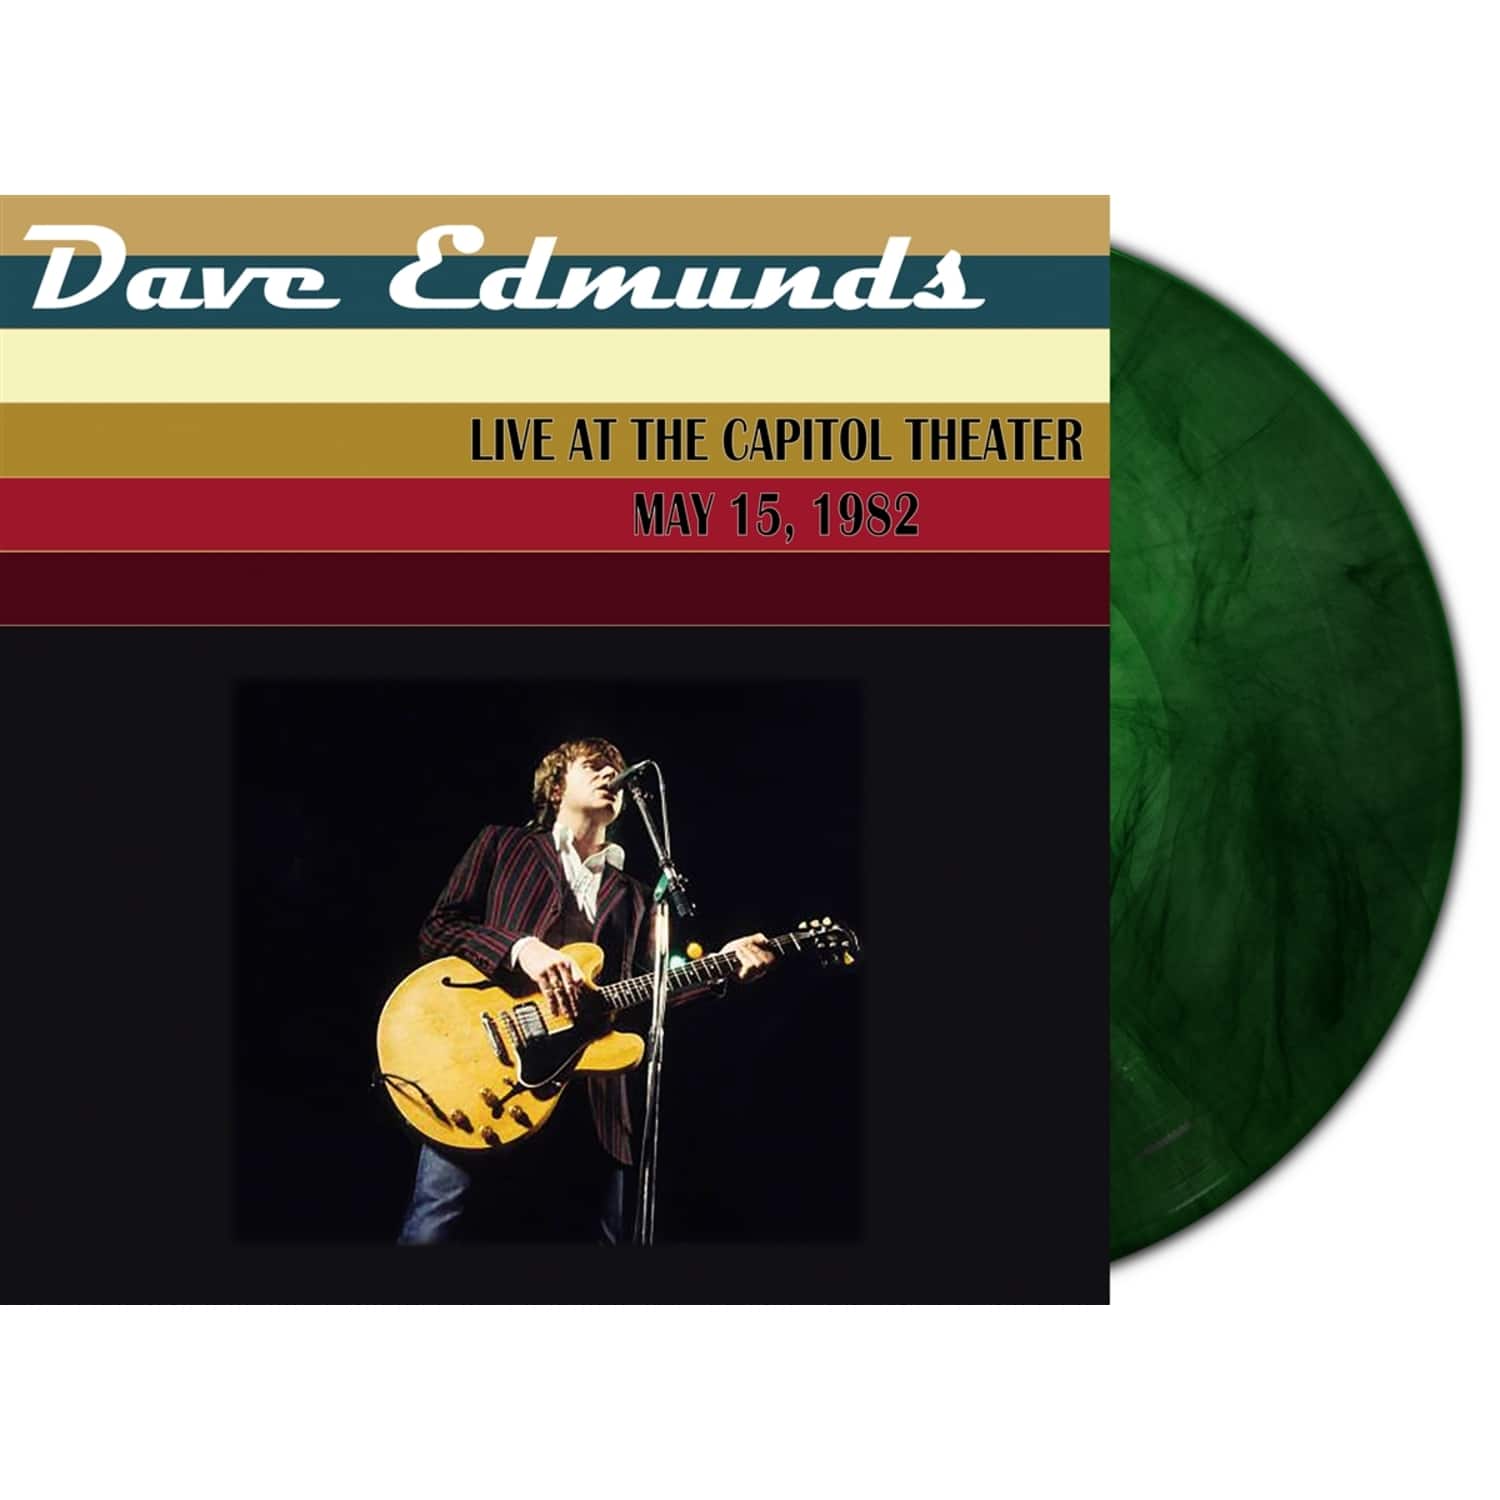 Dave Edmunds - LIVE AT THE CAPITOL THEATER 